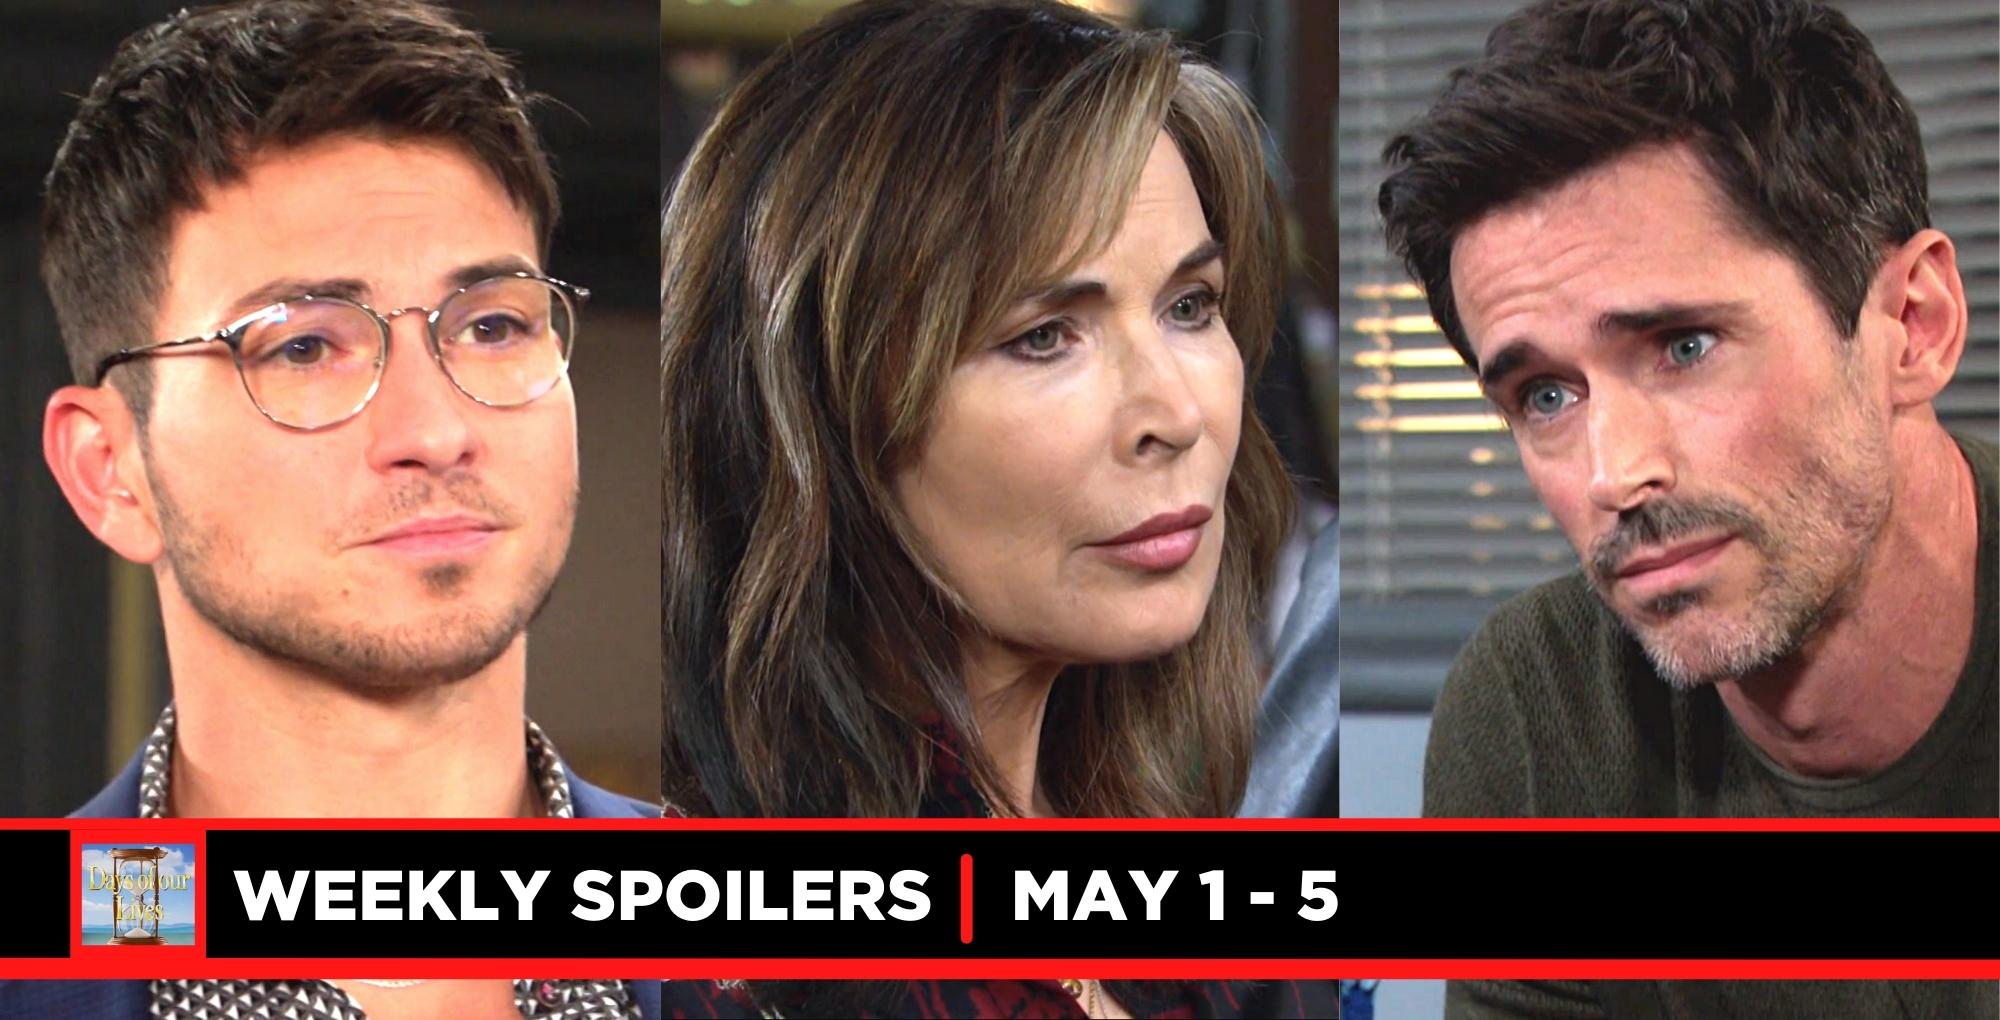 days of our lives spoilers for may 1 – may 5, 2023, three images alex, kate, and shawn